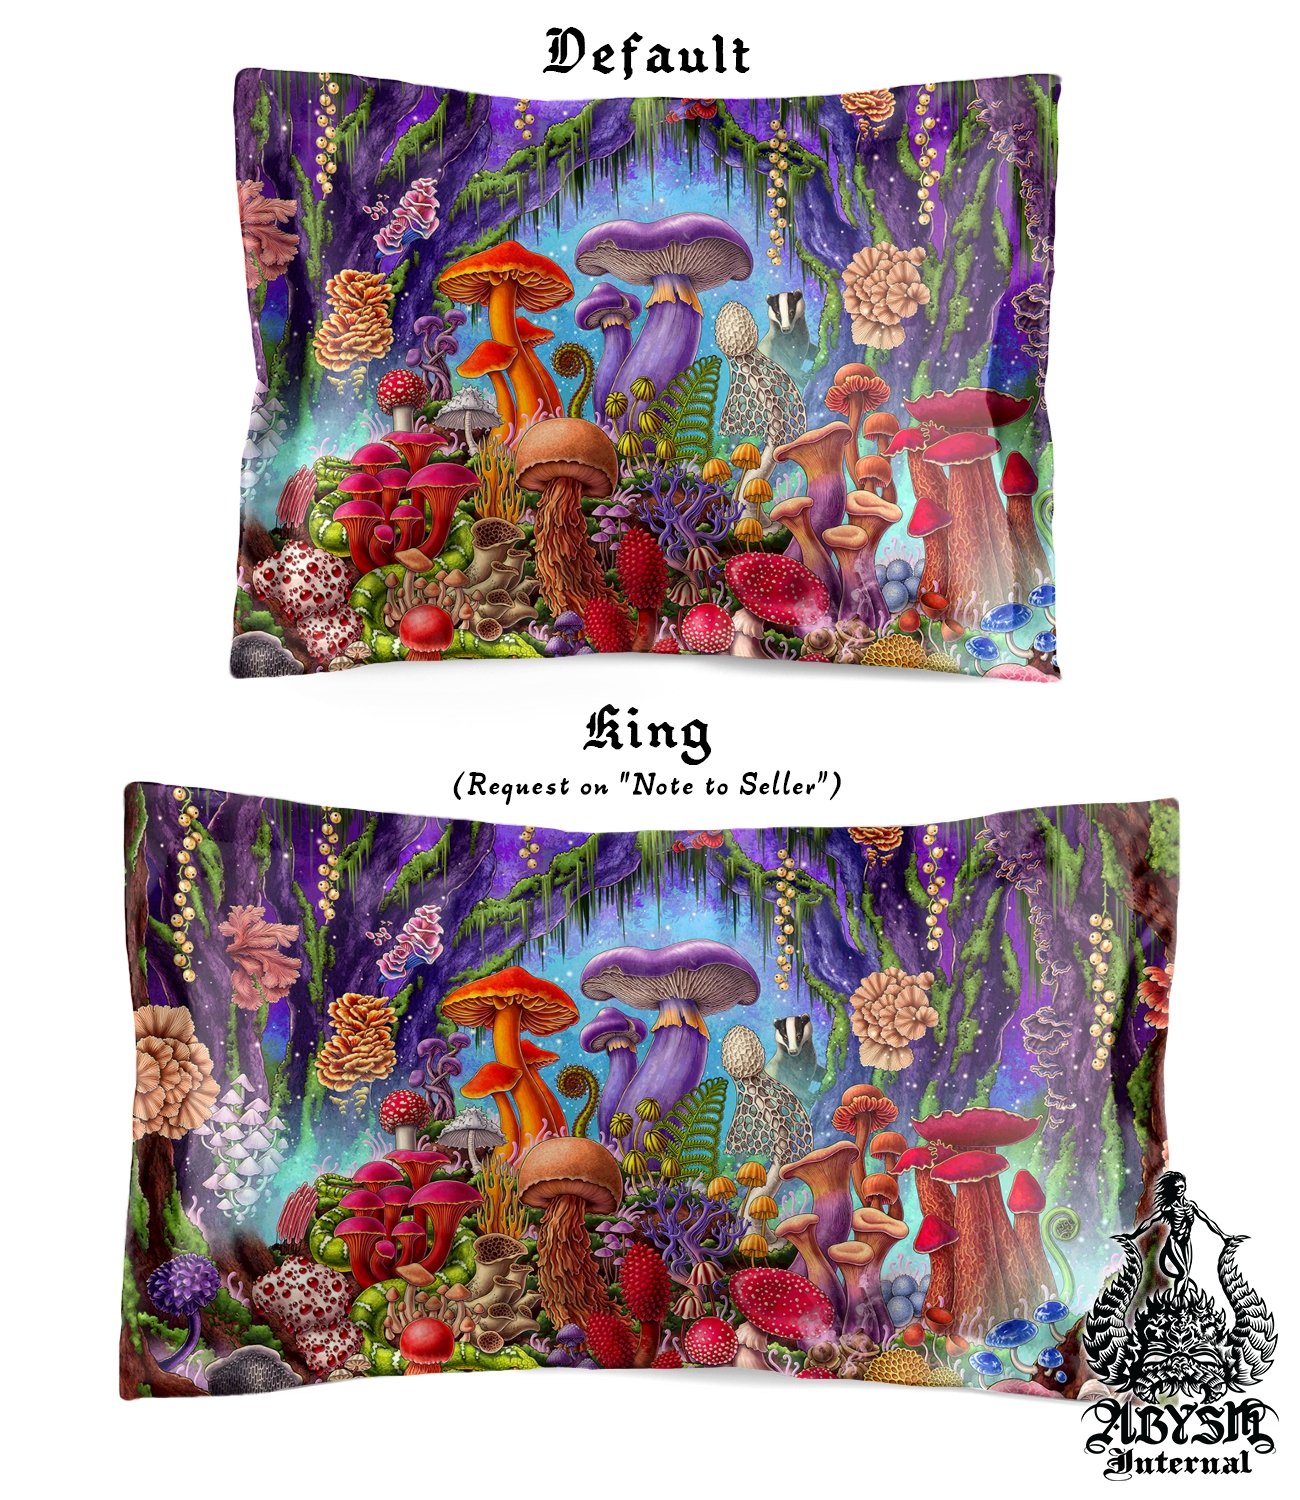 Mushrooms Bedding Set, Comforter and Duvet, Kids Fantasy Bed Cover, Bedroom Decor, King, Queen and Twin Size - Magic Forest, Original Colors - Abysm Internal